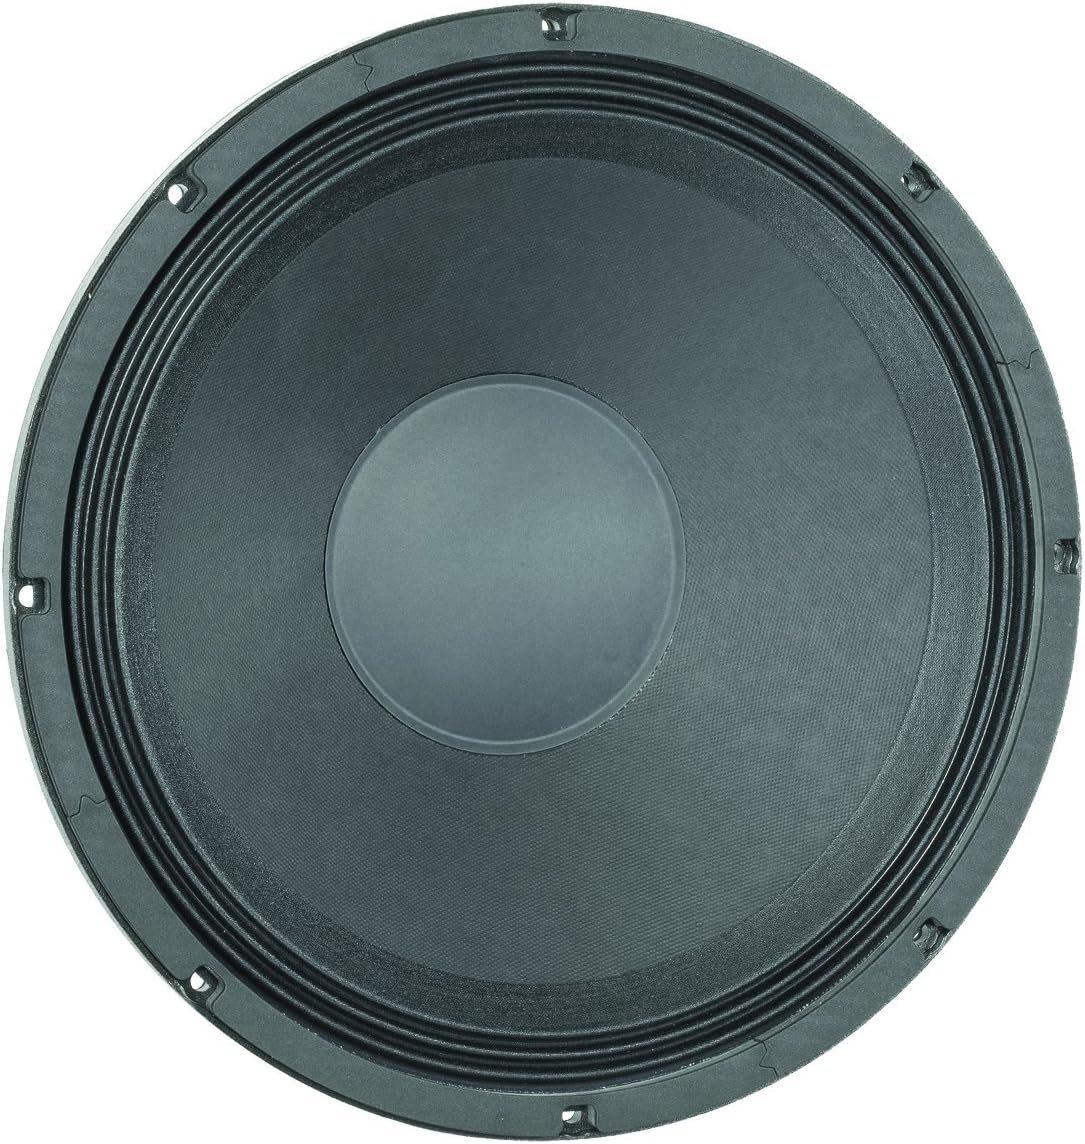 Eminence Professional Series Kappa Pro 15LF2 15" Pro Audio Speaker with Extended Bass, 600 Watts at 8 Ohms, Black - image 2 of 3